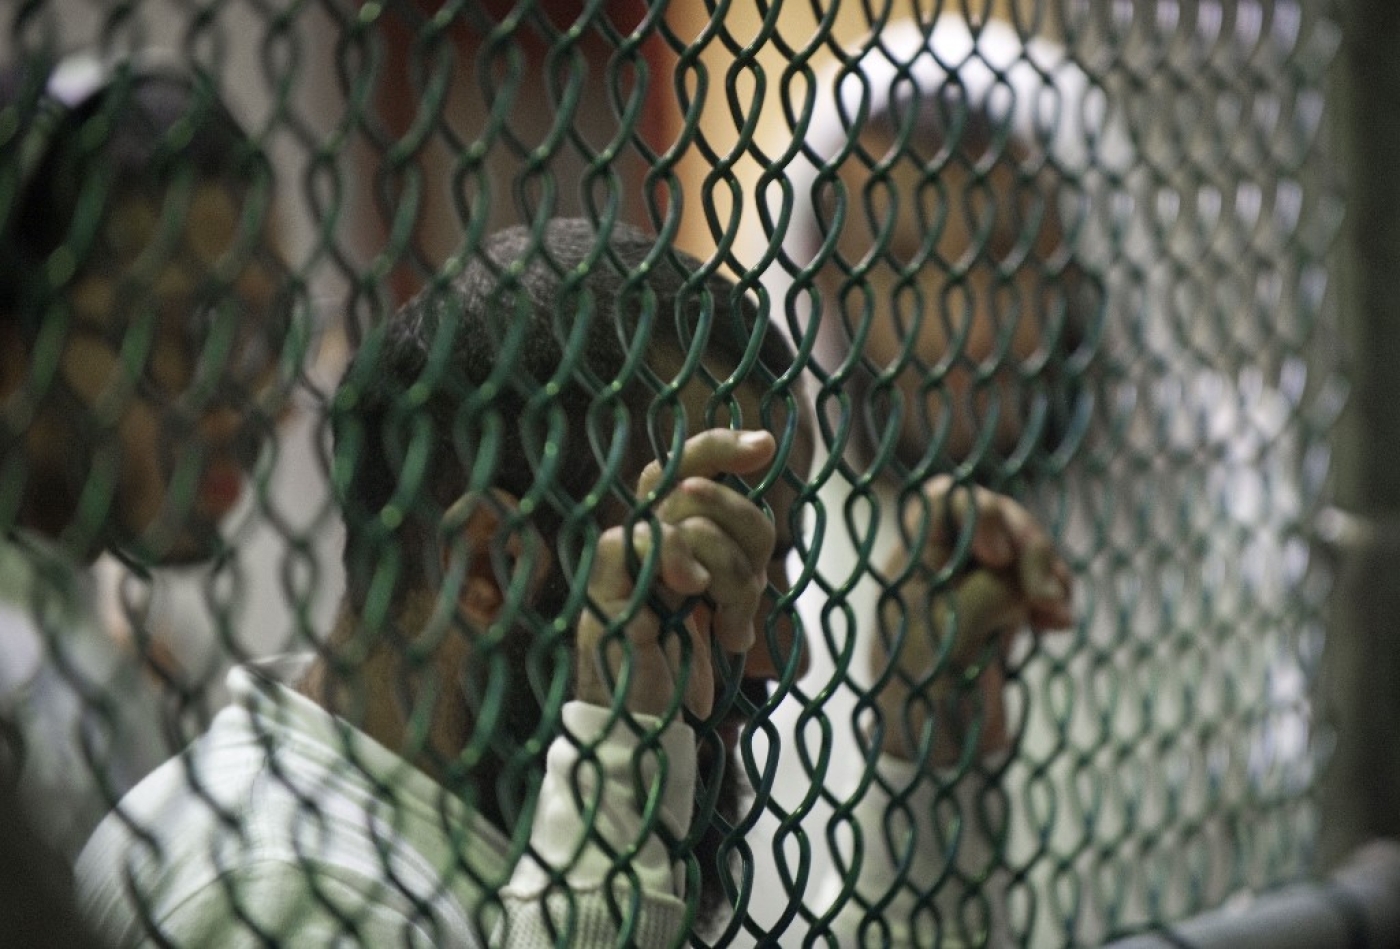 Detainees line up at a chain link fence for library books and magazines inside Camp VI at Guantanamo Bay prison in 2010